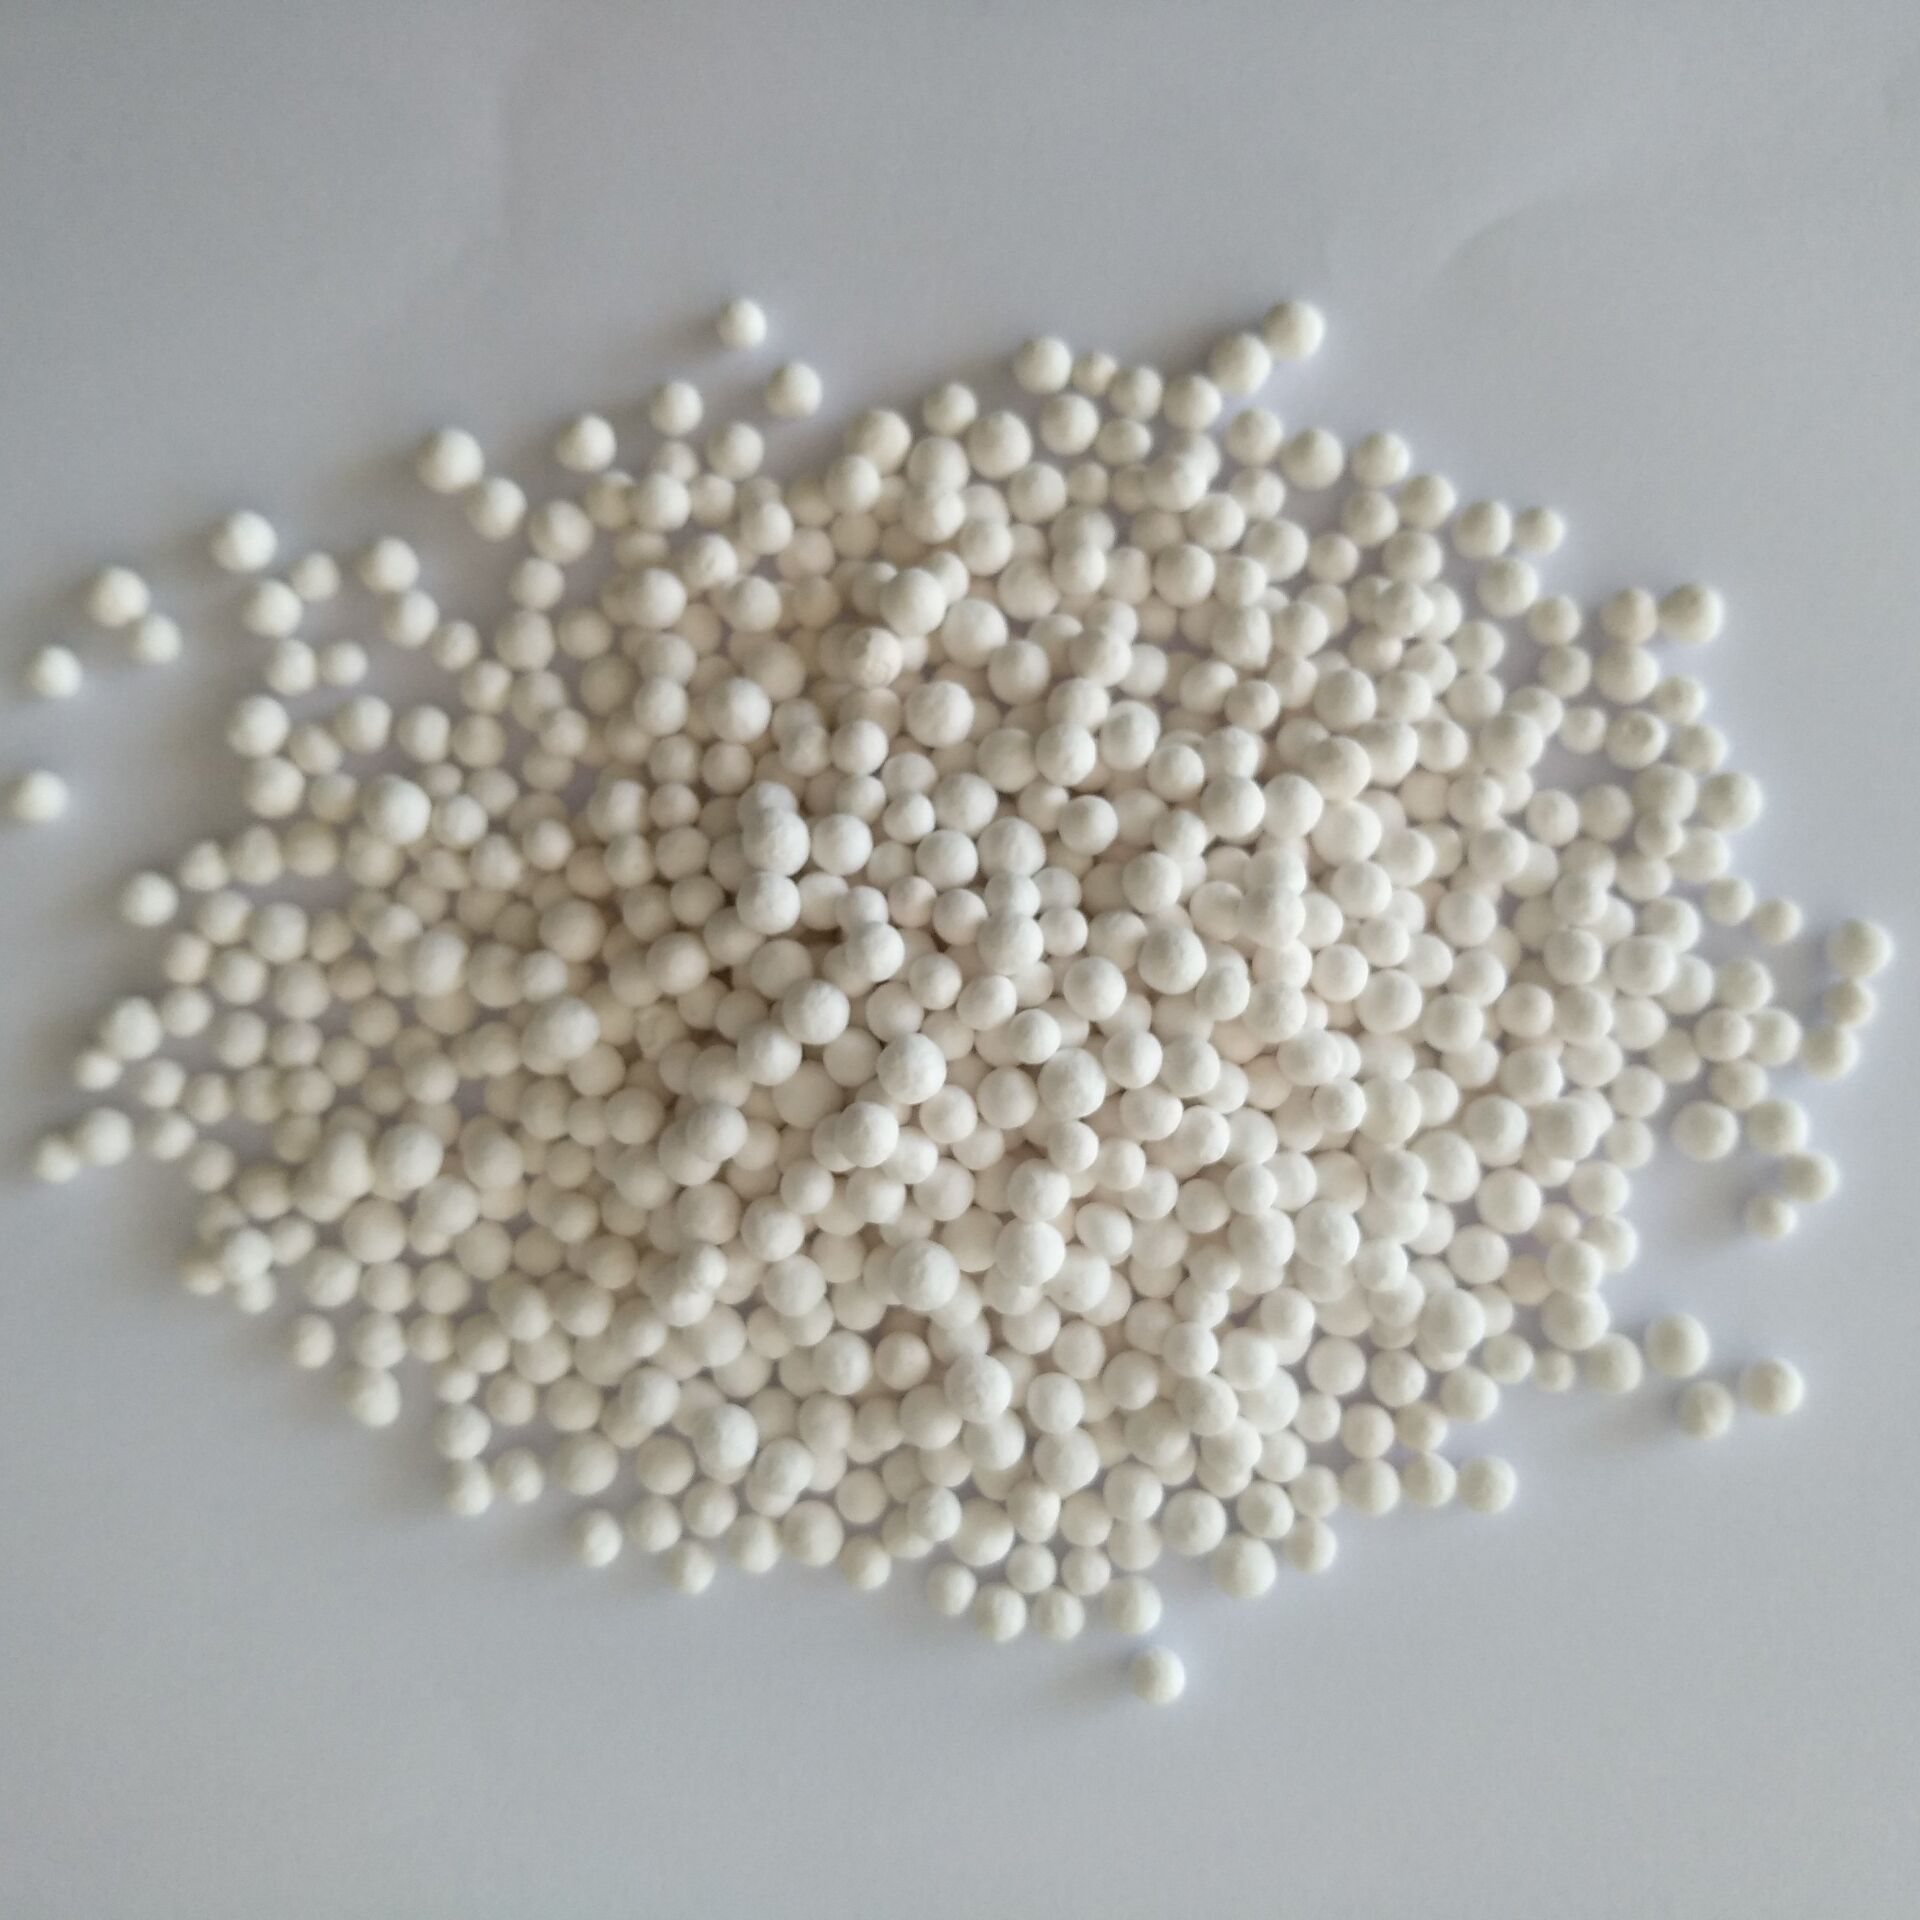 chloride-removal adsorbent